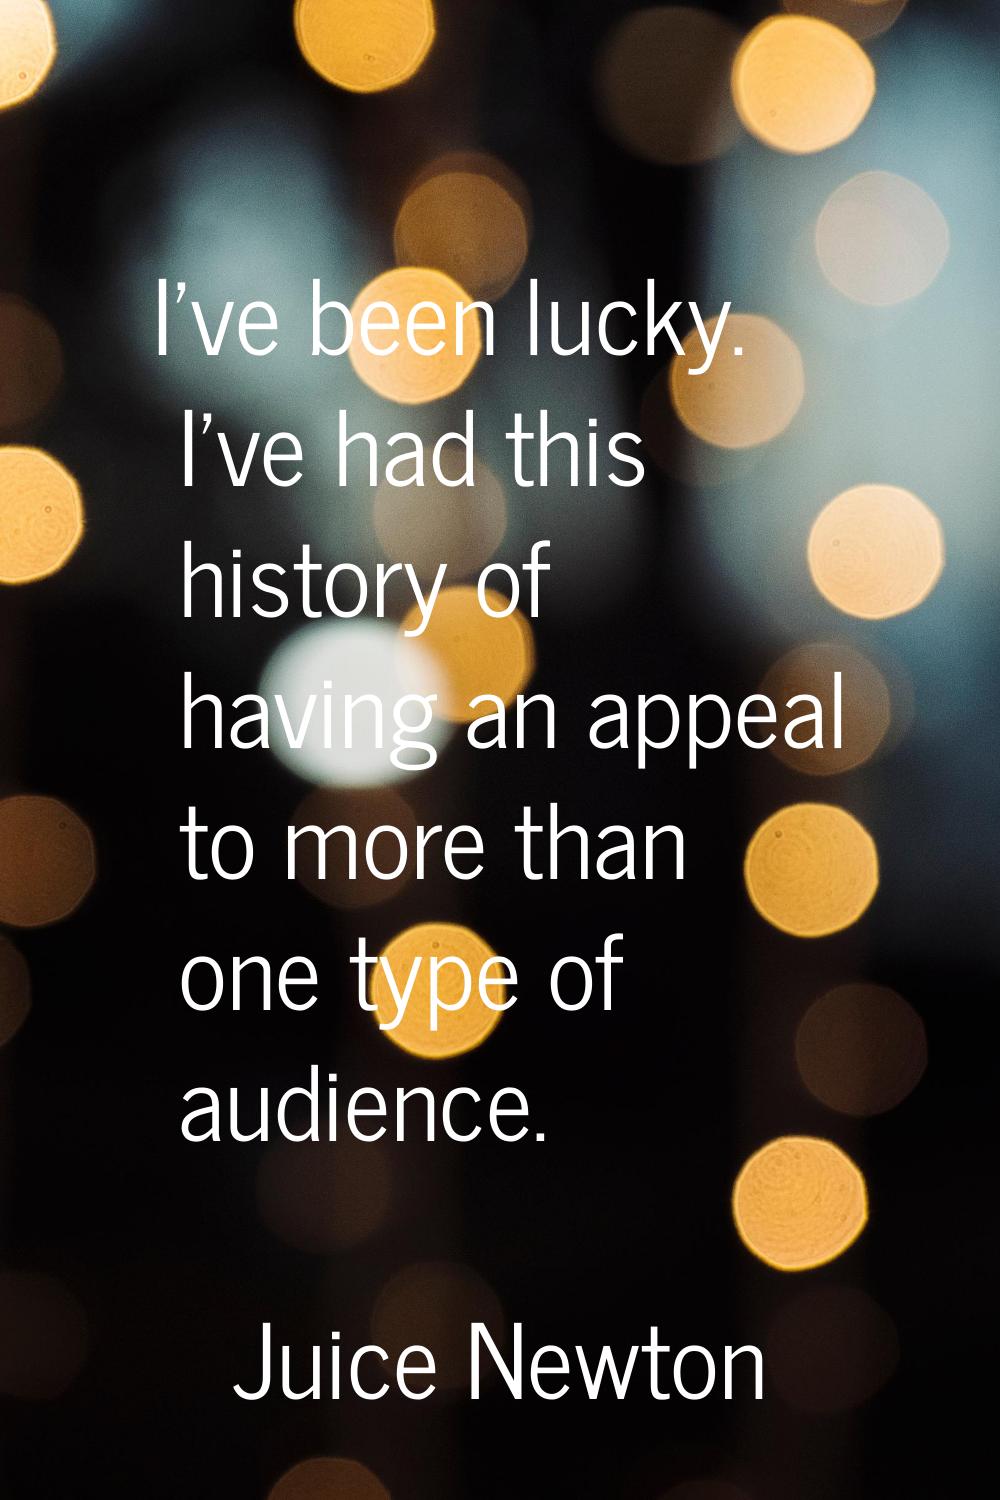 I've been lucky. I've had this history of having an appeal to more than one type of audience.